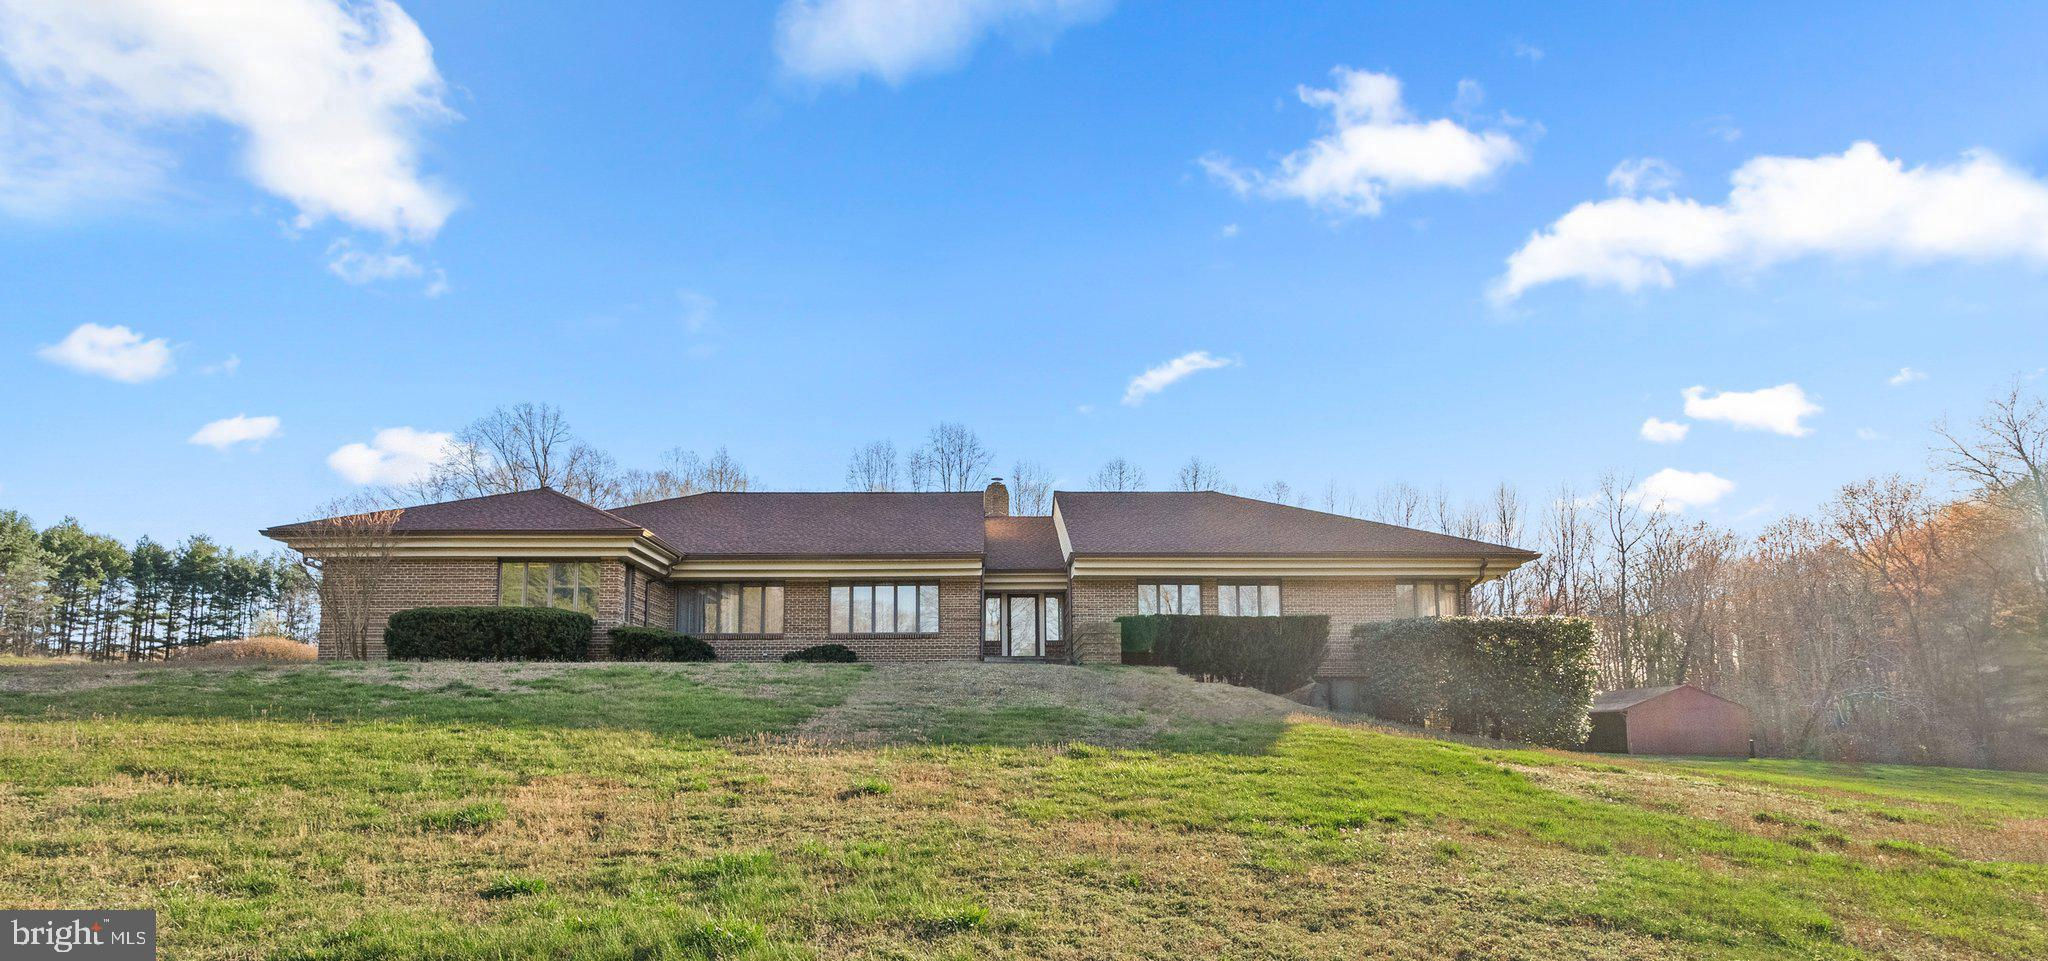 50 Little Tree Lane, Owings, MD 20736 is now new to the market!